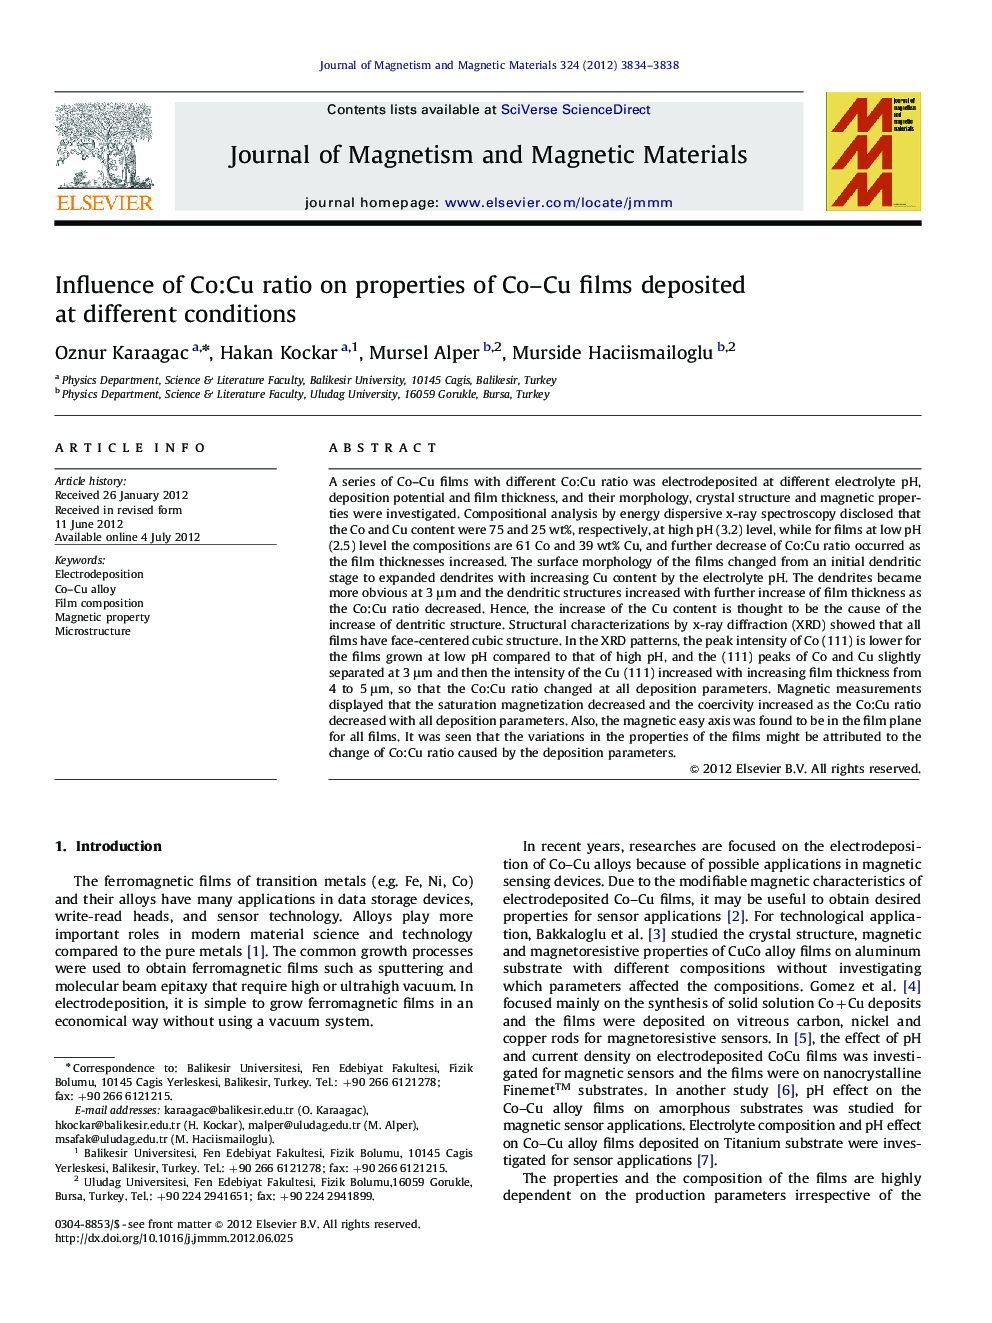 Influence of Co:Cu ratio on properties of Co-Cu films deposited at different conditions